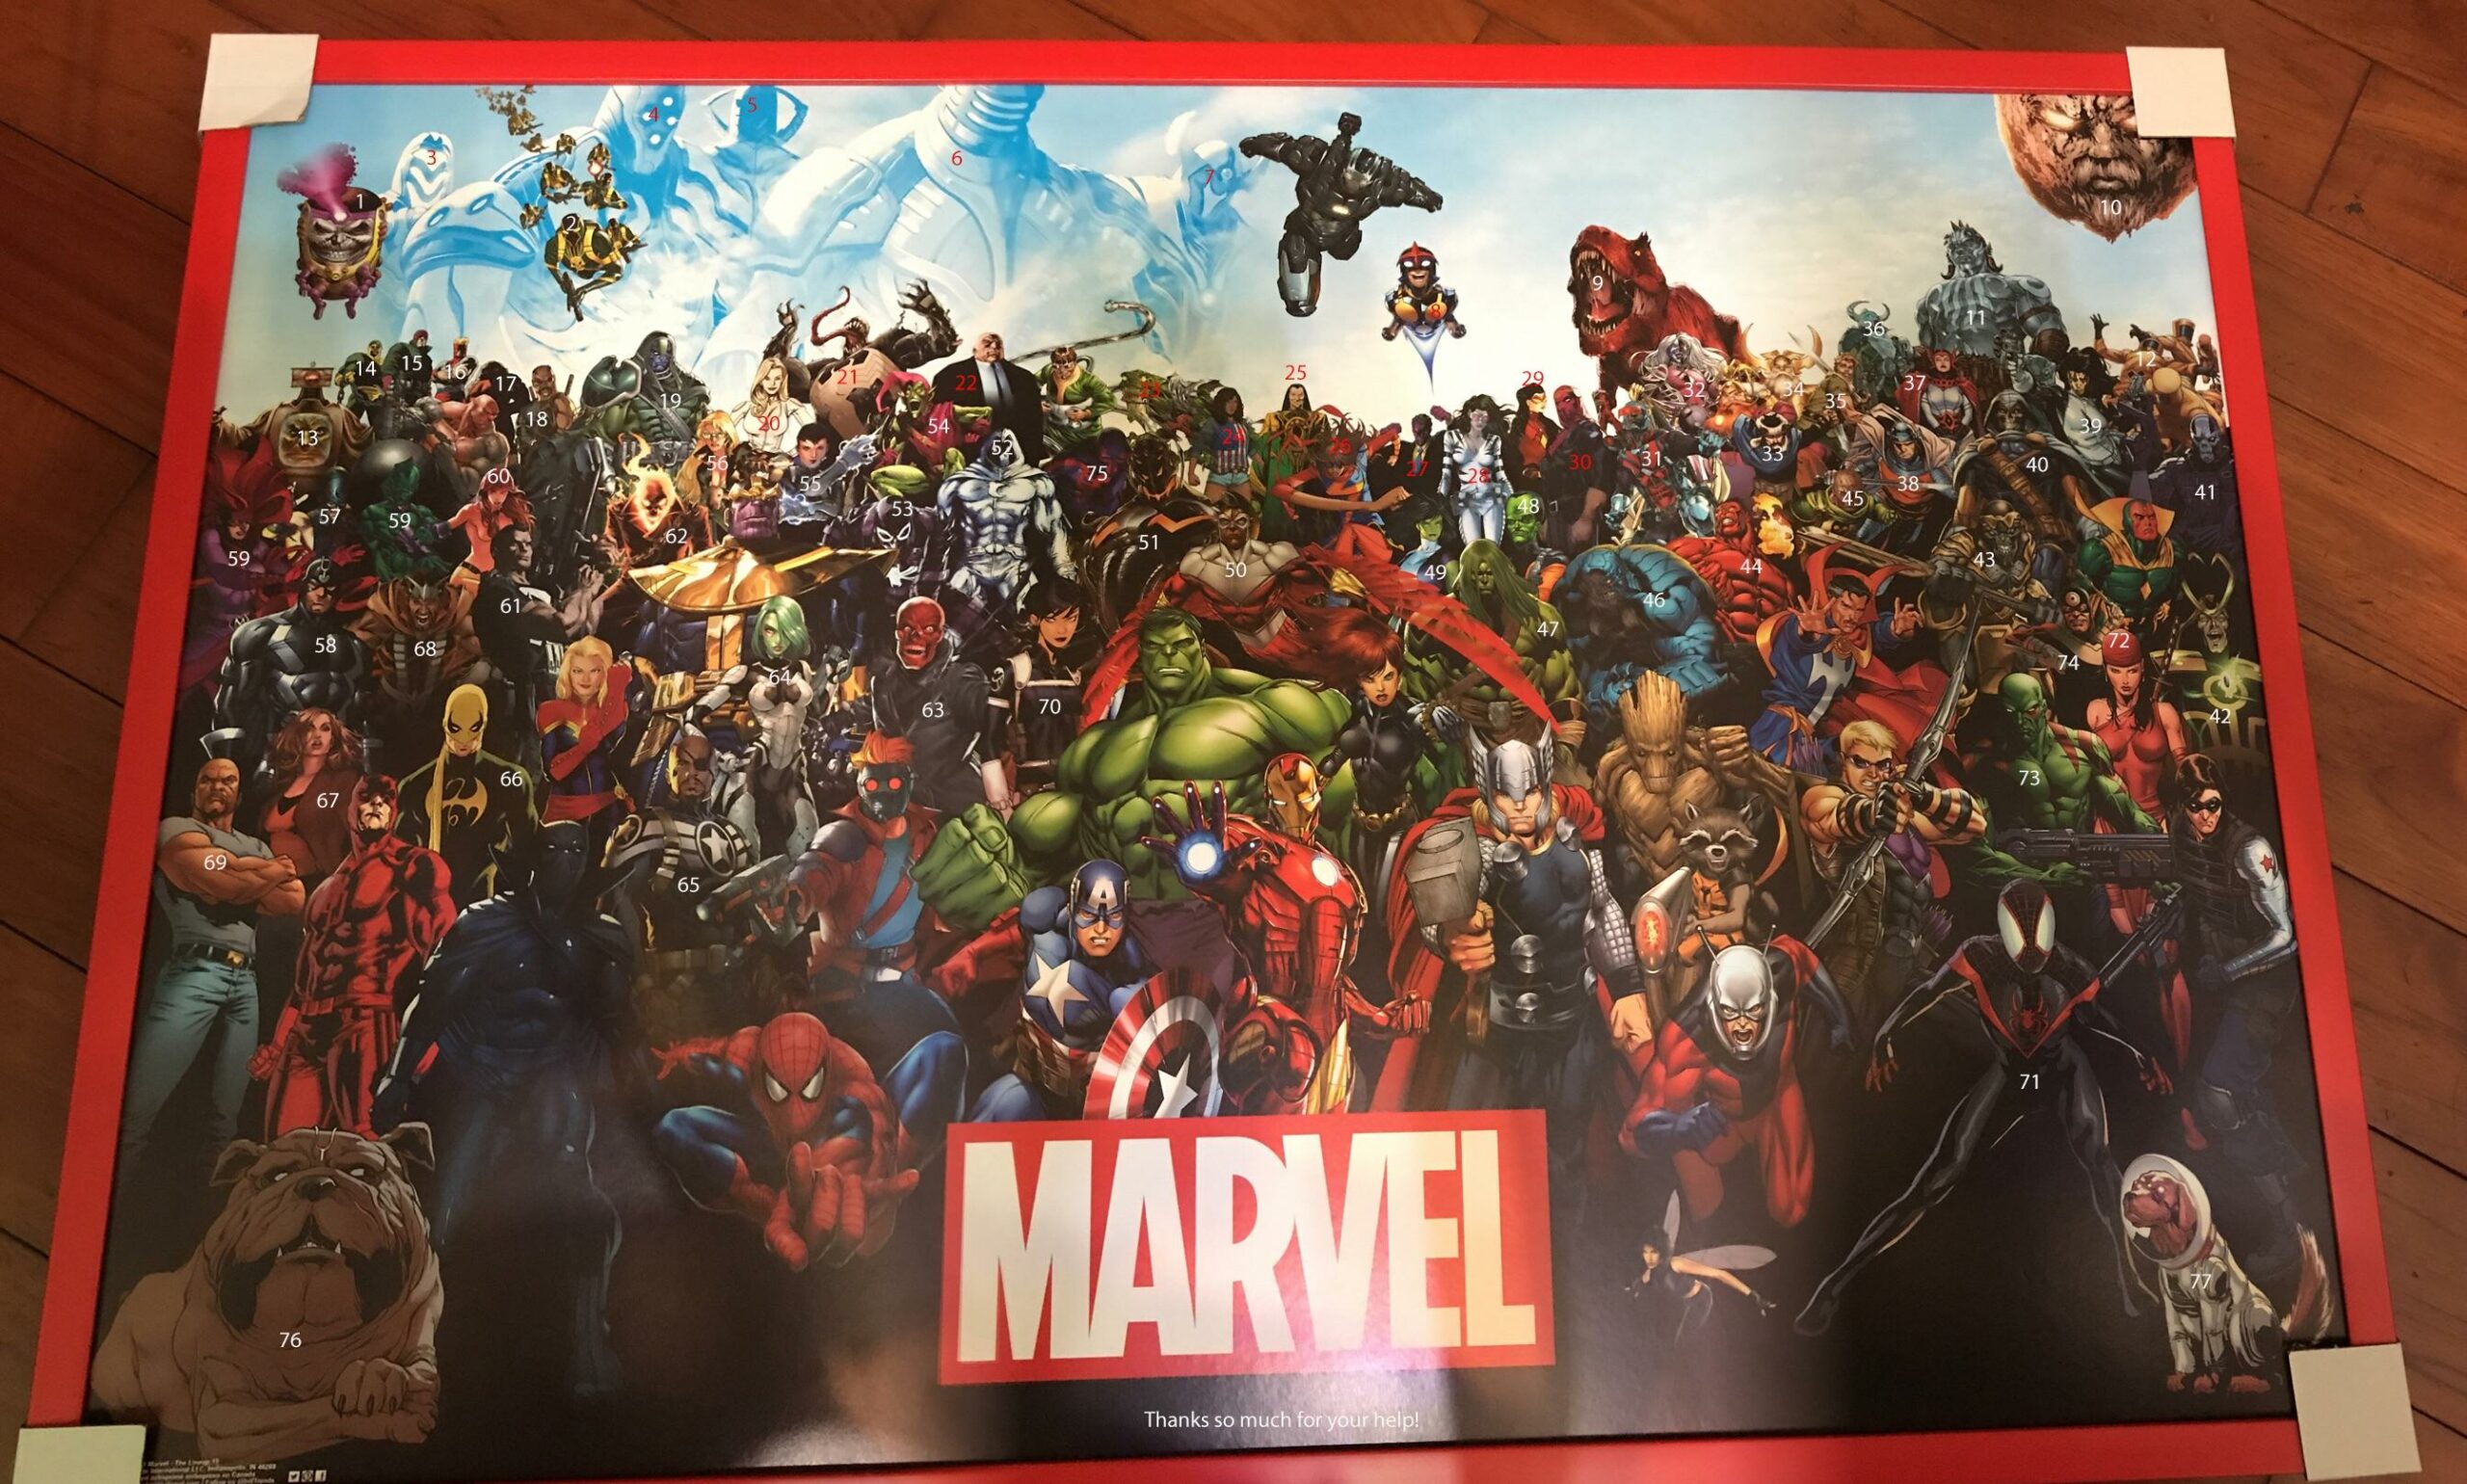 Hi, I got this poster but don't know many marvel characters. I would ...